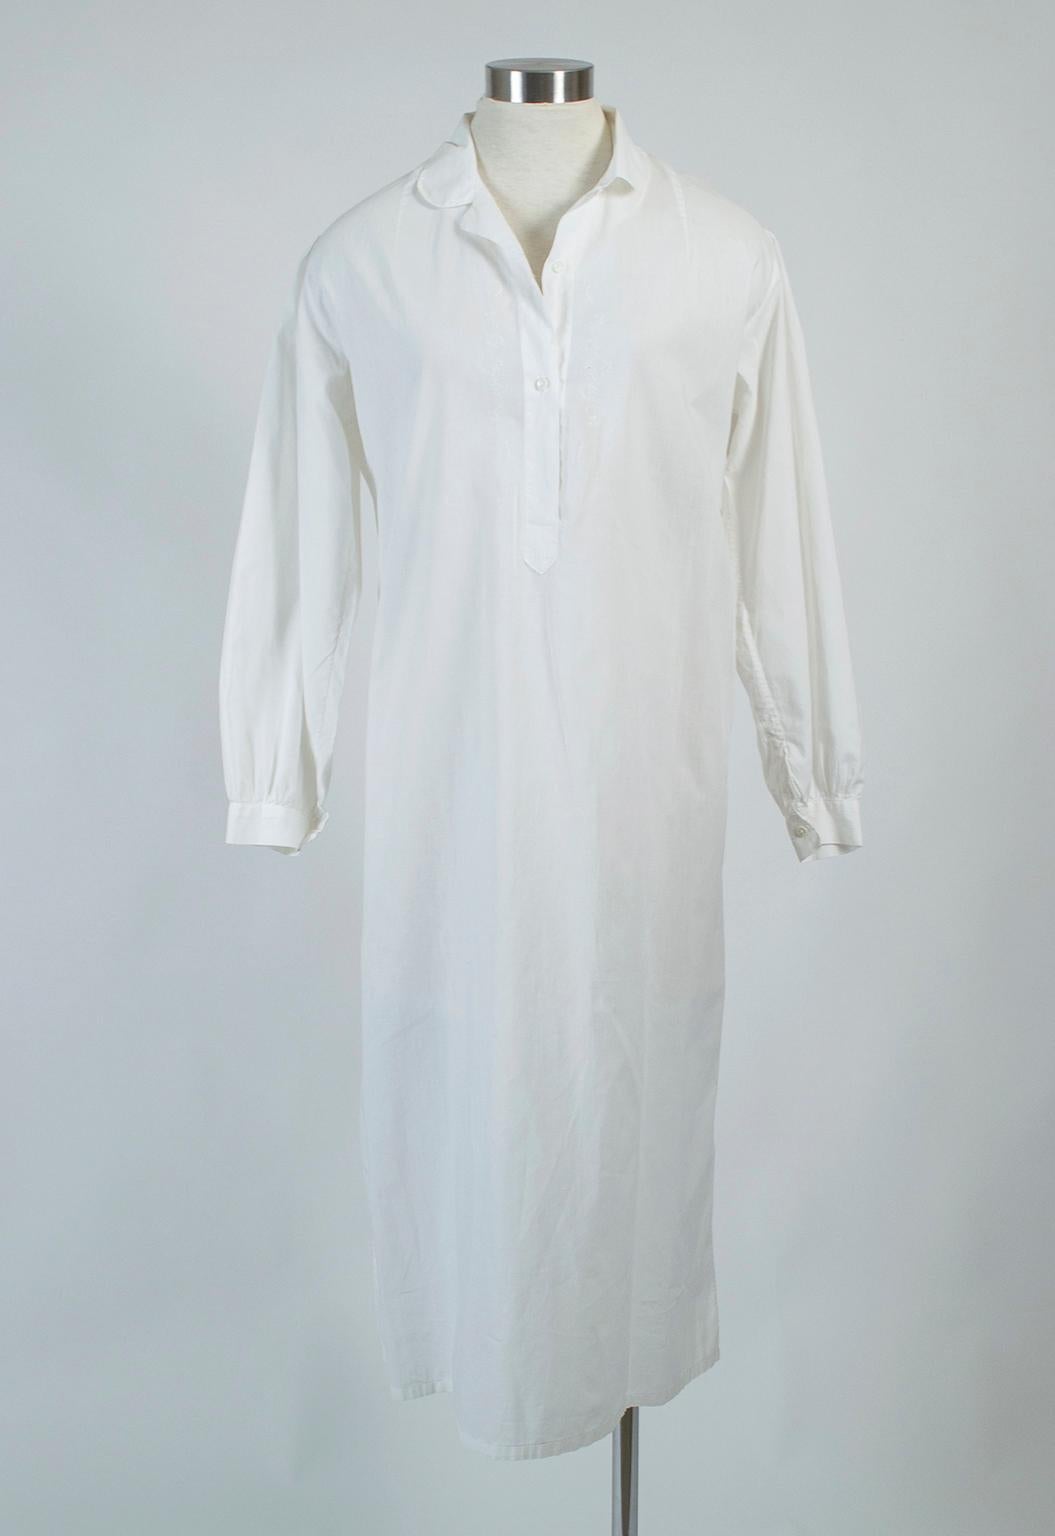 Identical to a contemporary button-front night shirt except this one is over 100 years old and conjures images of a Charles Dickens novel. As bright, white and crisp as it was when it was new, with discrete touch of embroidery and a Peter Pan collar